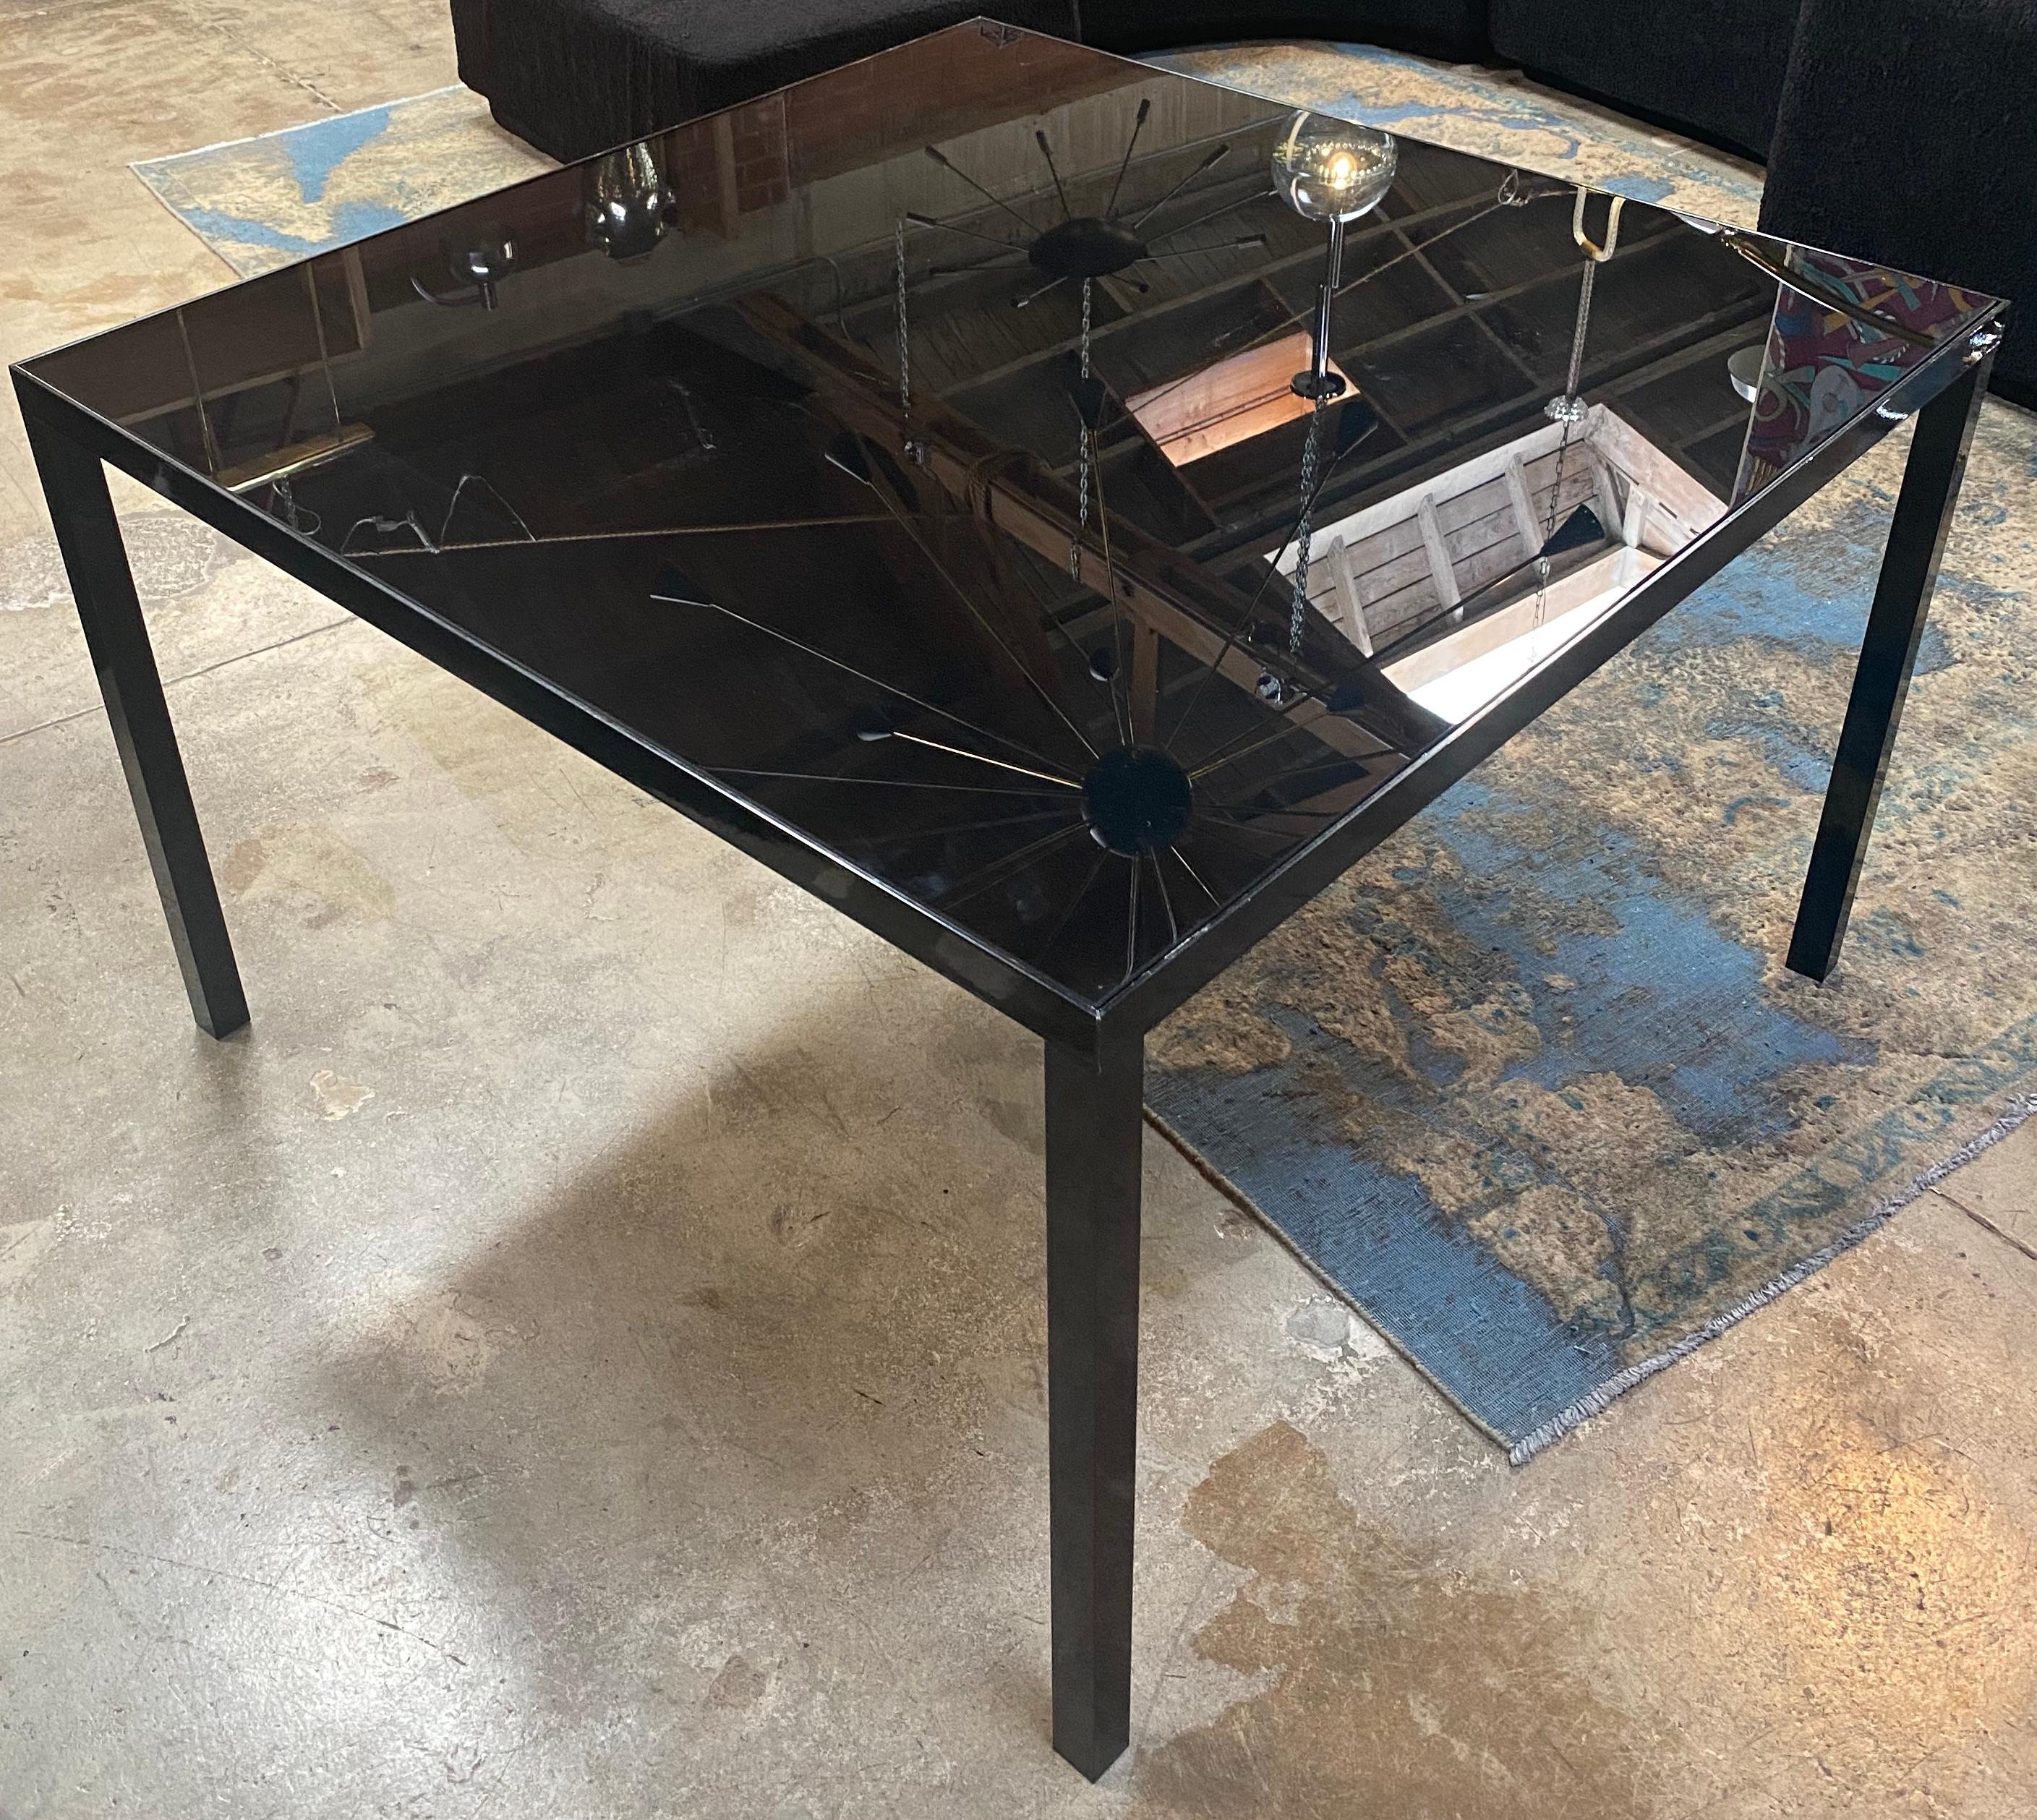 Beautiful Italian metal and glass top dining table. The table is in very good conditions and present minor use. Nothing touches, nothing clashes, which gives this piece of furniture a completely peaceful yet strong expression. A piece like this will